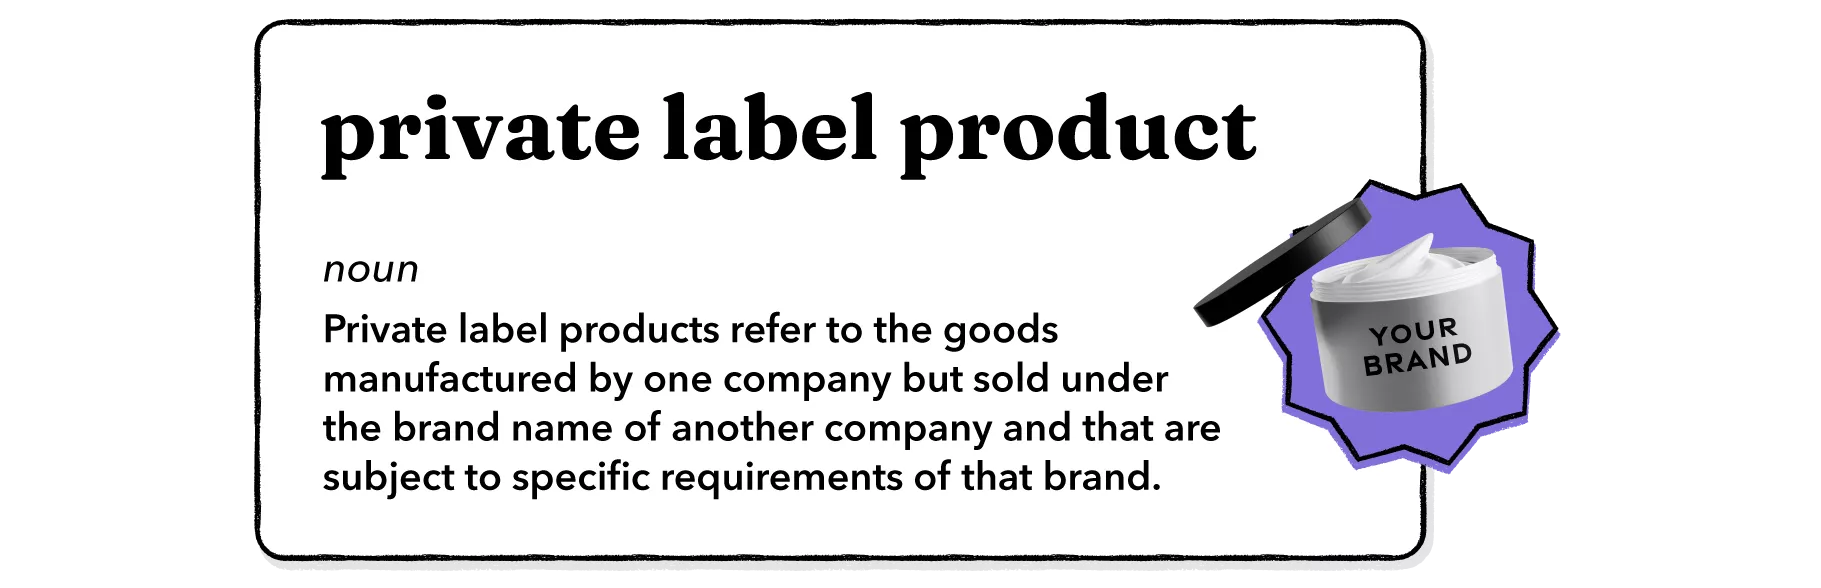 private label product definition